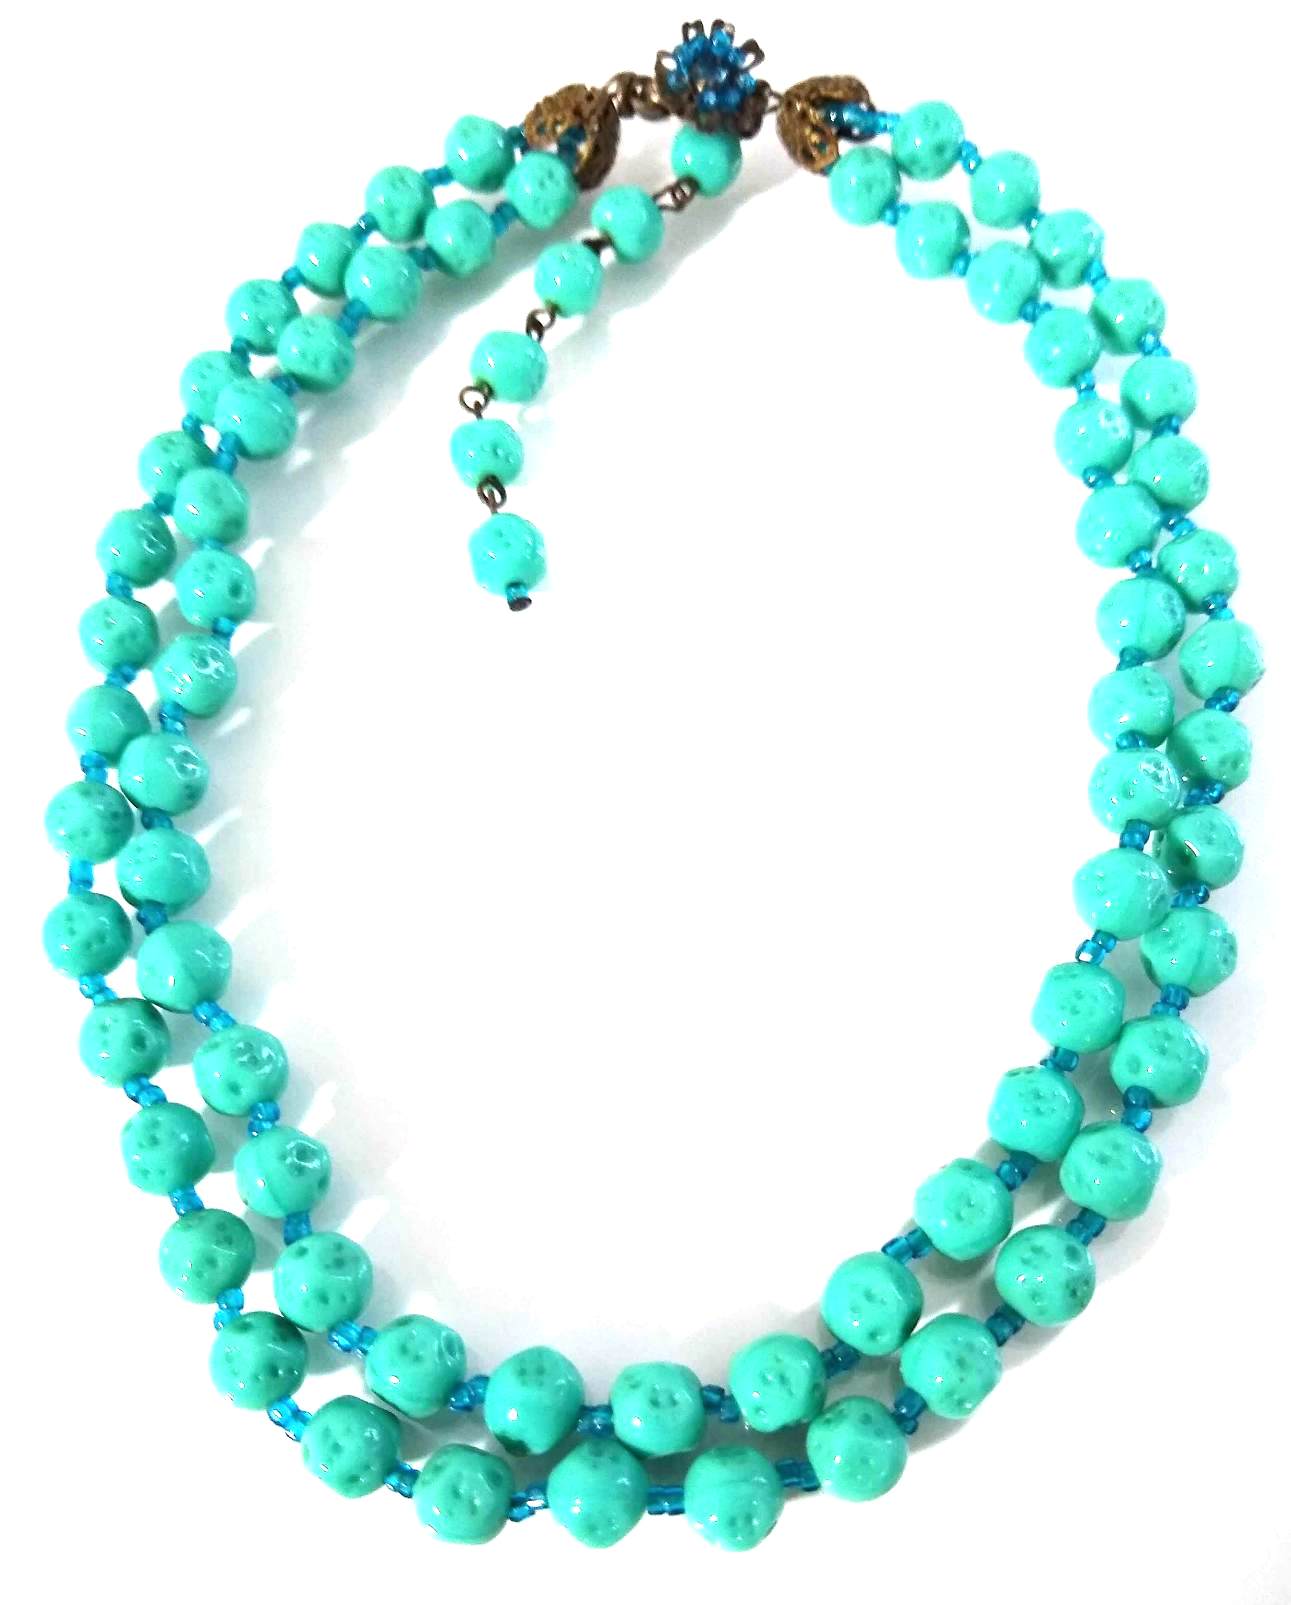 haskell necklace turquoise two strand (1).jpg